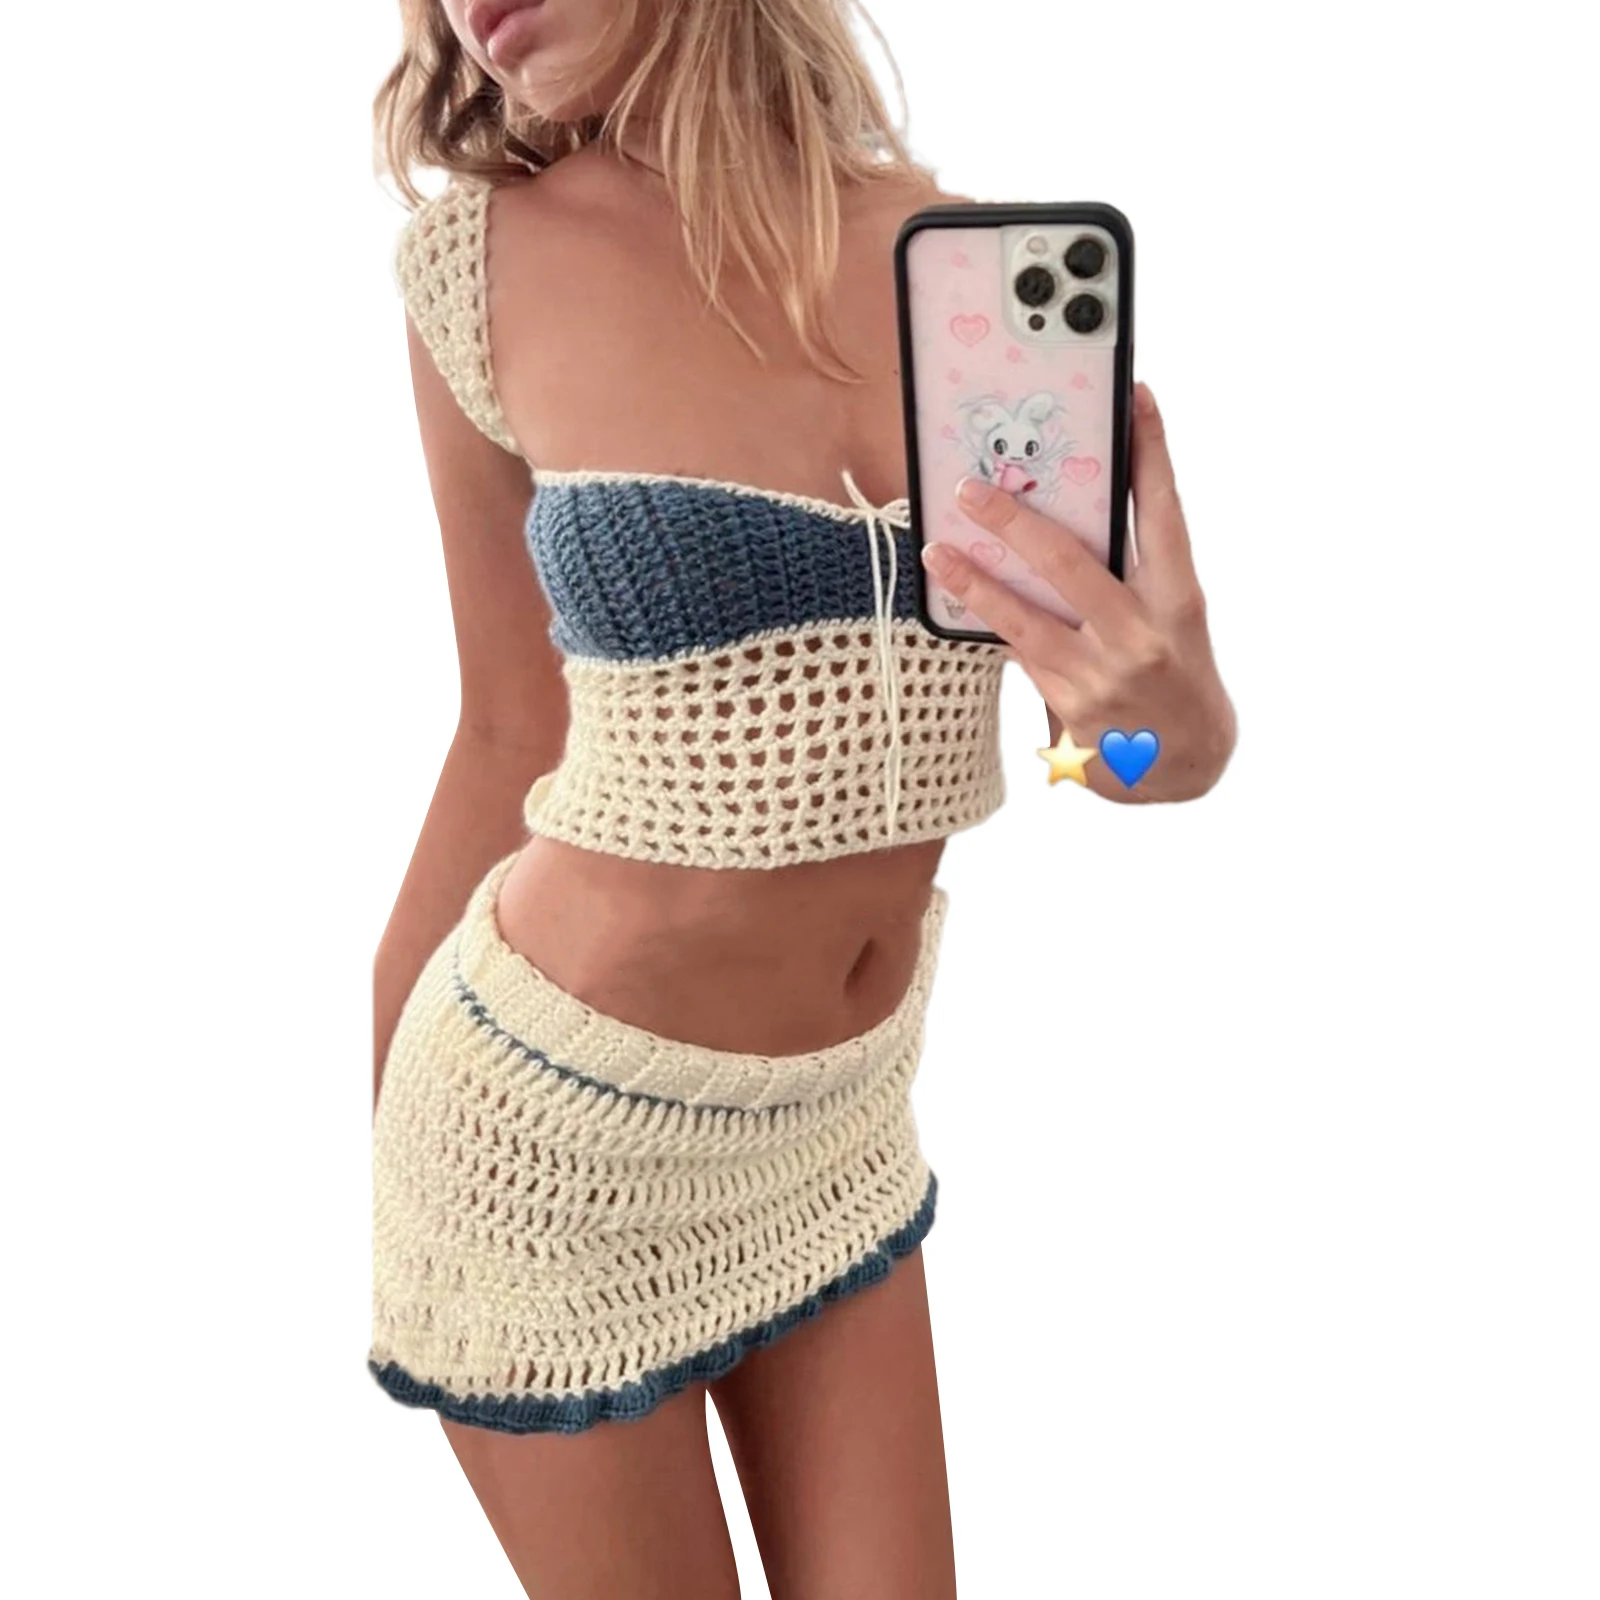 2PCS Women's Knitting Suit Summer Outfit Sleeveless Knit Hollow Patchwork Tie Up Tops Elastic Contrast Color Skirt Beachwear dvotinst women photography props maternity dresses pregnancy pink knitting sweater white shorts 2pcs studio photoshoot clothes